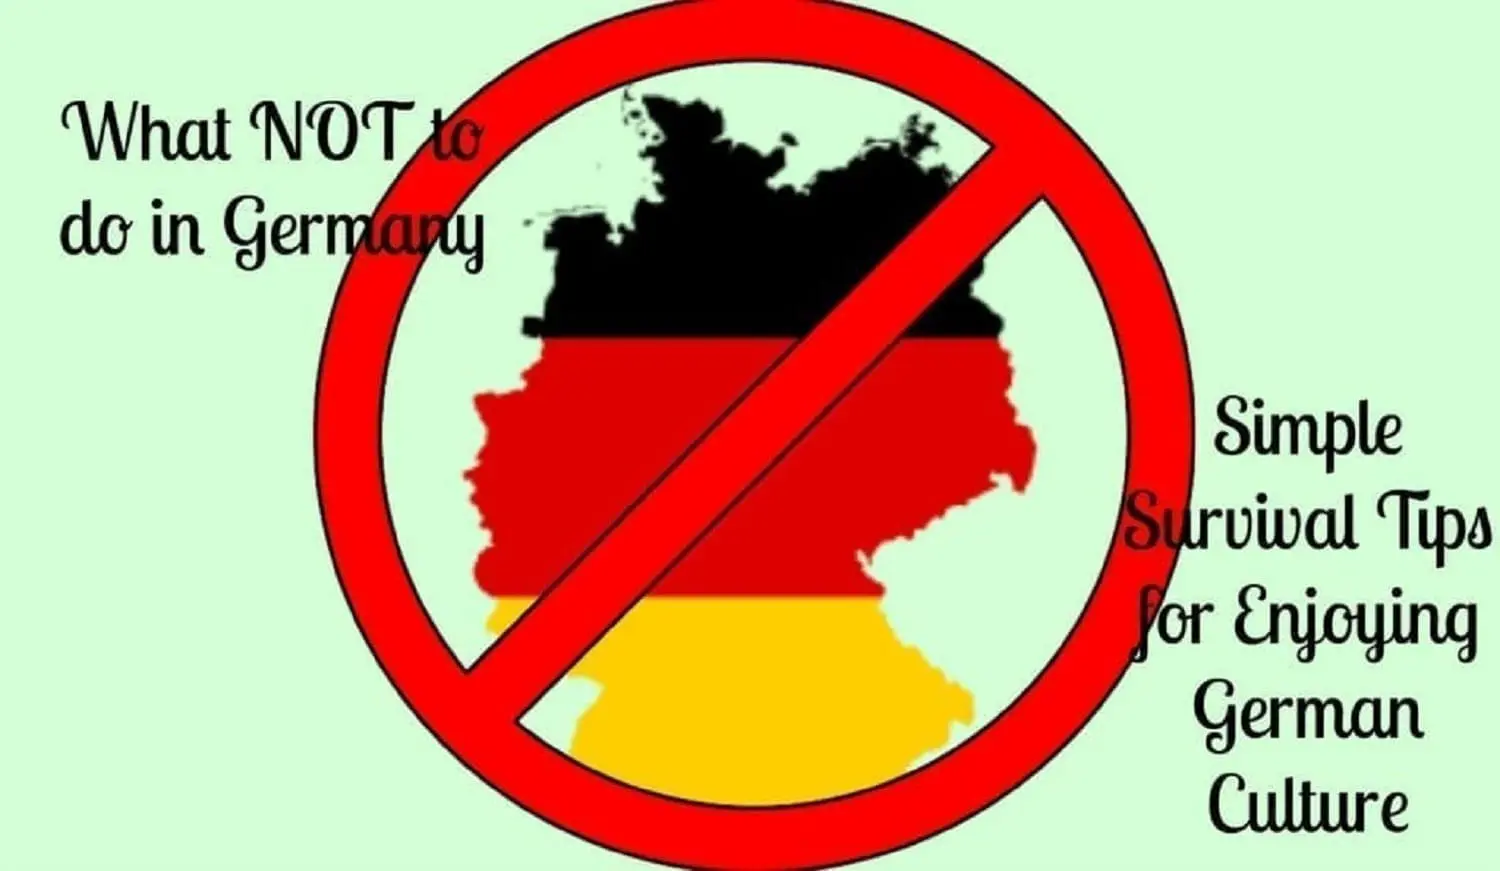 What not to do in Germany- Tips for Enjoying German Culture